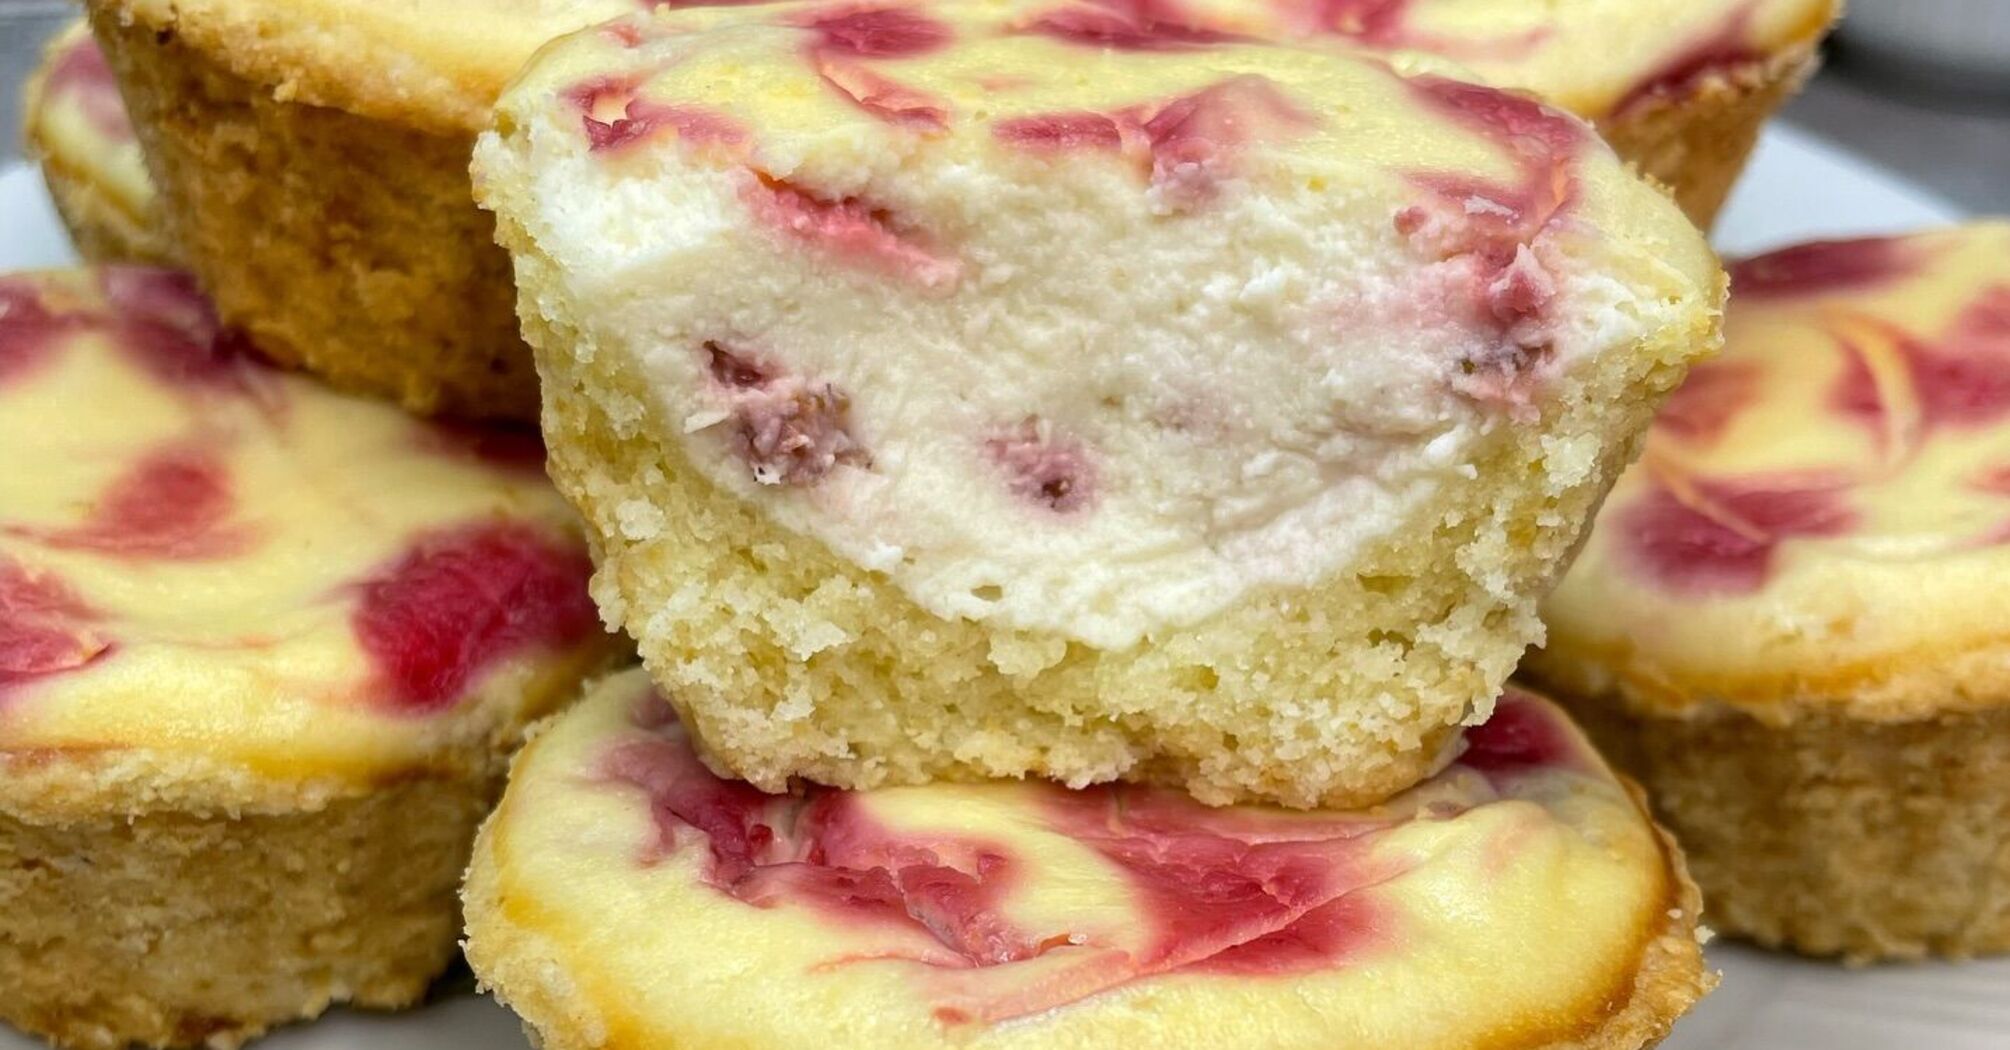 Curd muffins with strawberries on shortbread: how to make a simple dessert for family tea drinking